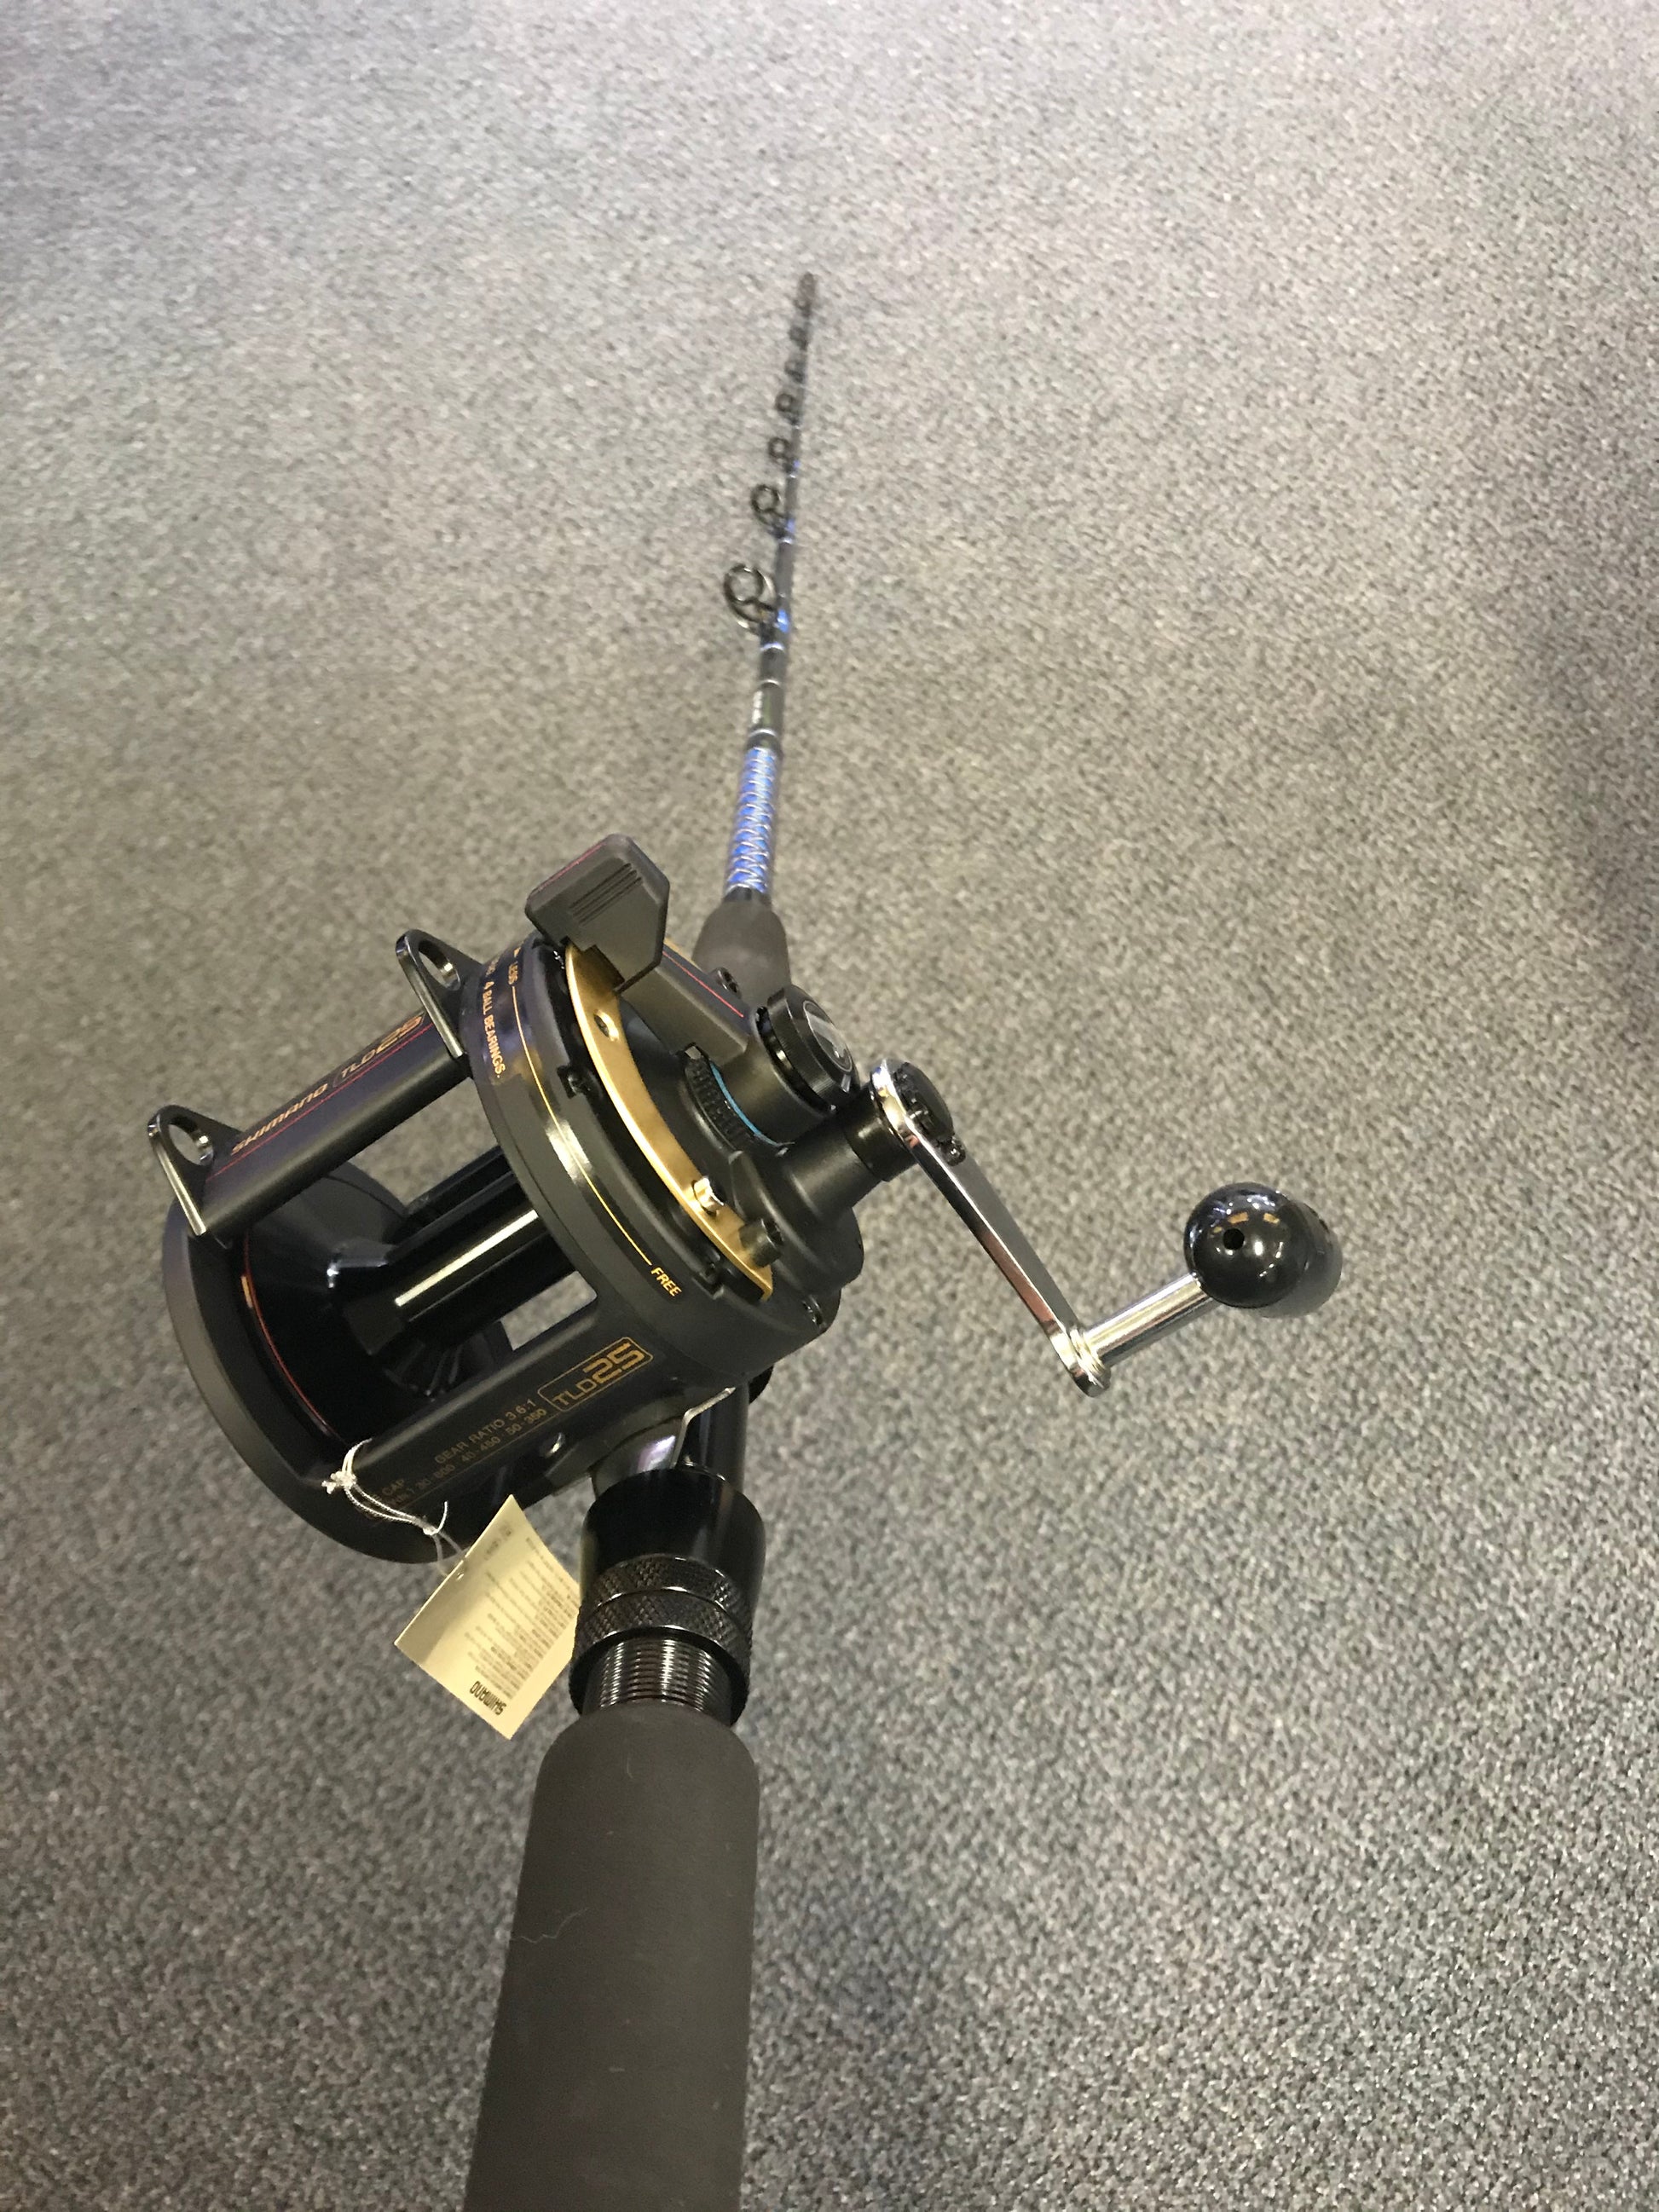 Shimano TLD50 and Full Rollered Backbone Elite Combo - Shop Now Zip Pay